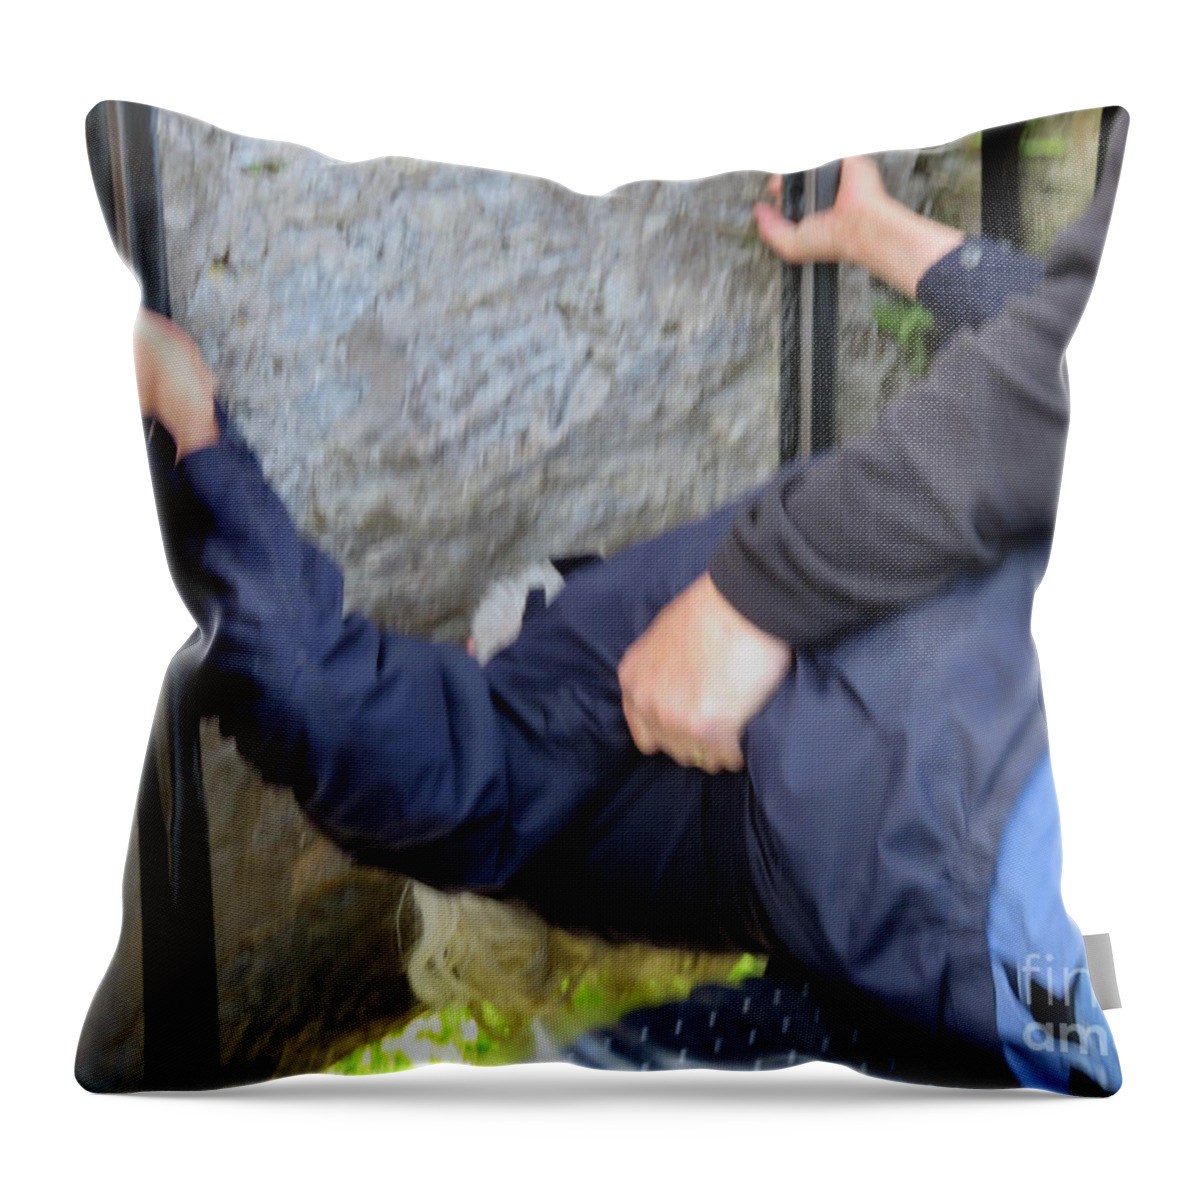 Blarney Stone Throw Pillow featuring the photograph Kiss the Blarney Stone by Cindy Murphy - NightVisions 